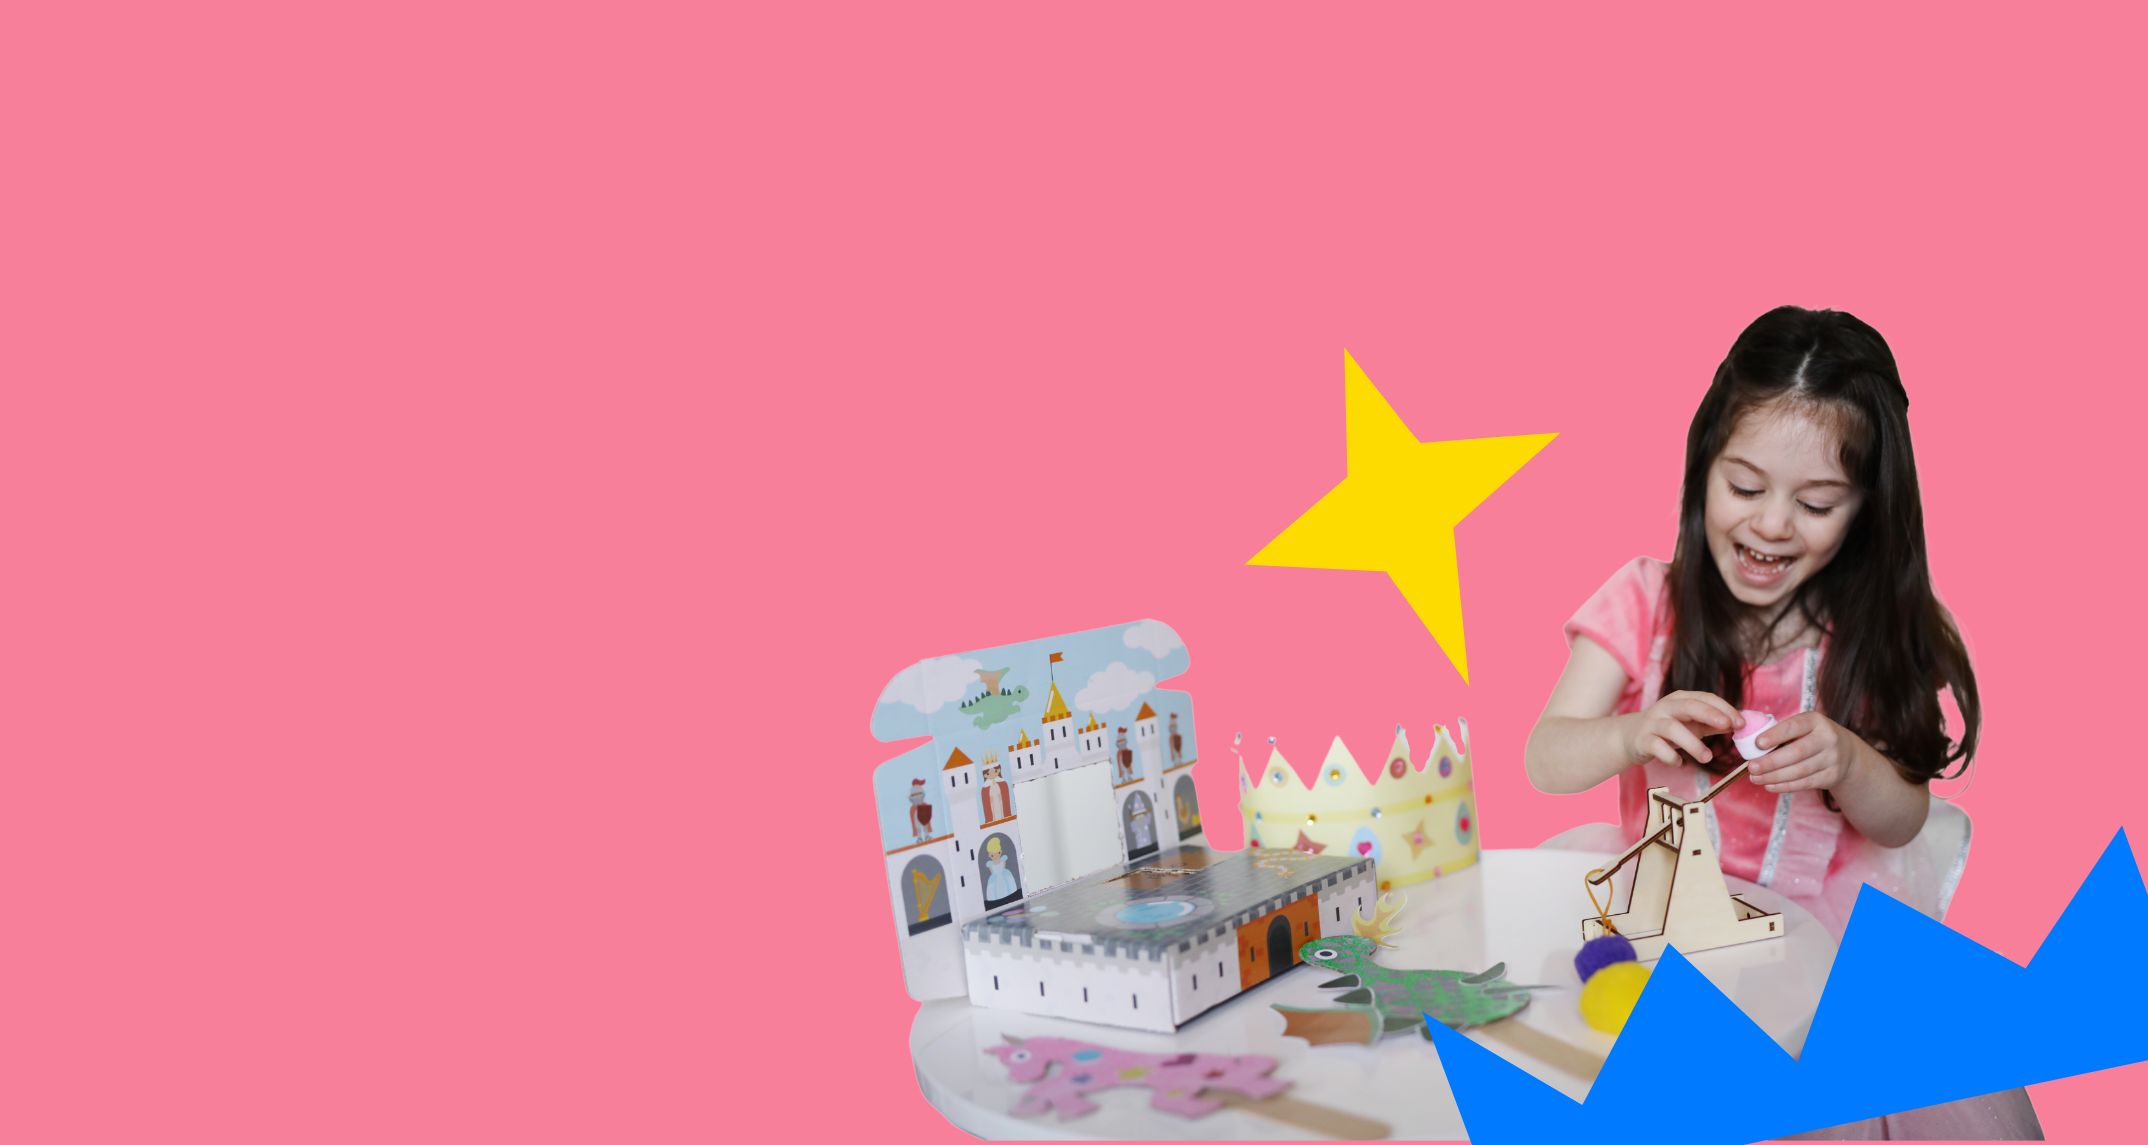 Princess Craft Kits for Girls Arts and Crafts for Toddler -  Denmark